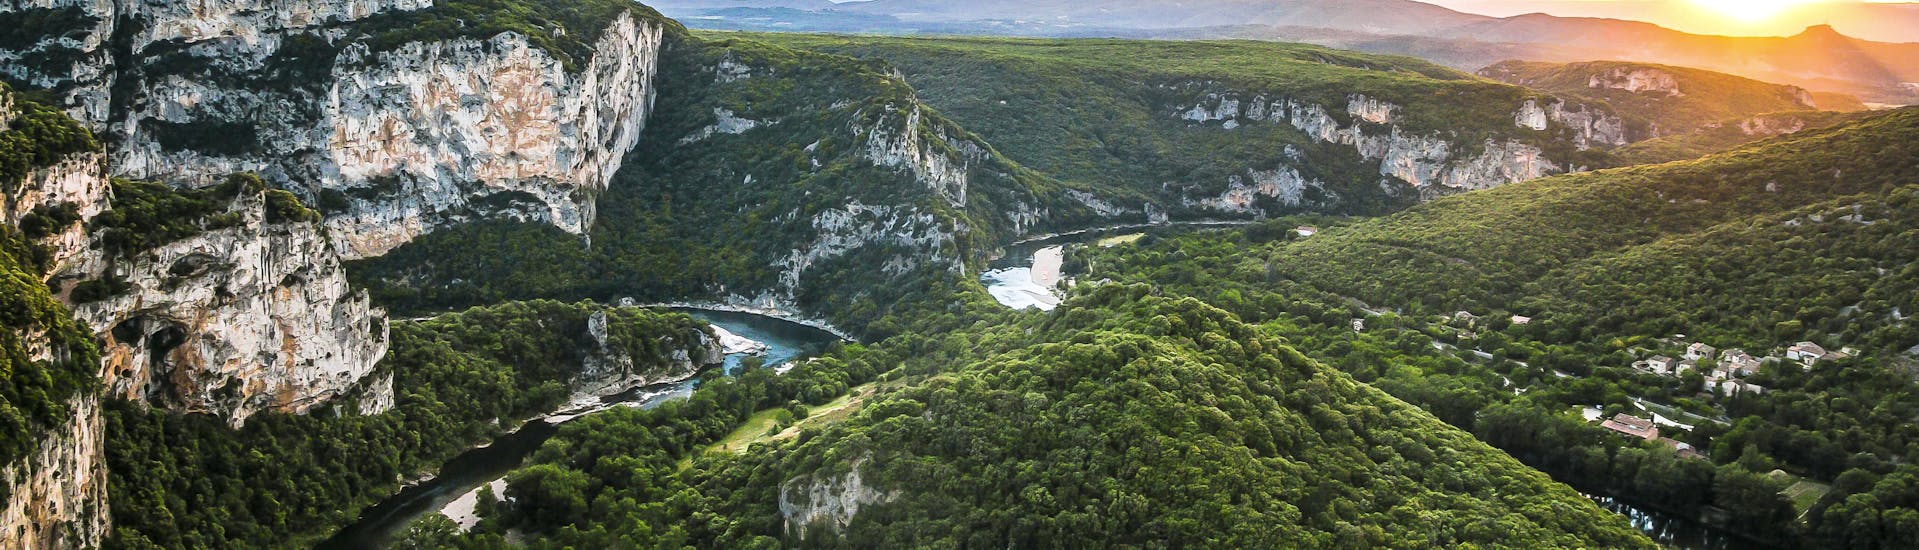 Ardèche Gorges during the 32km Kayak & Canoe Hire in Ardèche - 2 days with bivouac with Aigue-Vive.